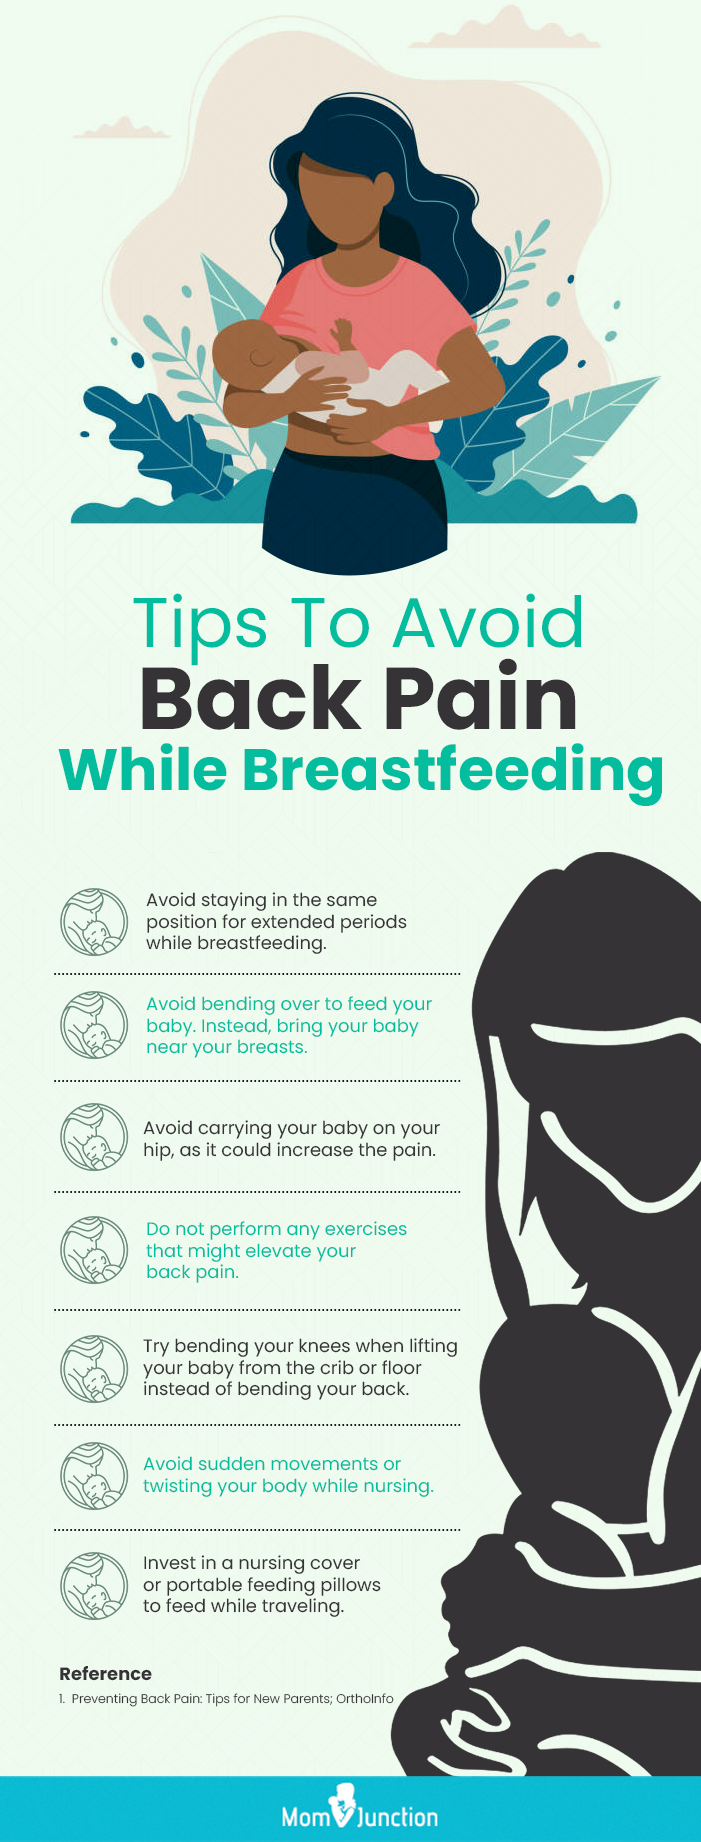 https://cdn2.momjunction.com/wp-content/uploads/2021/07/tips-to-avoid-backpain-while-breastfeeding.png